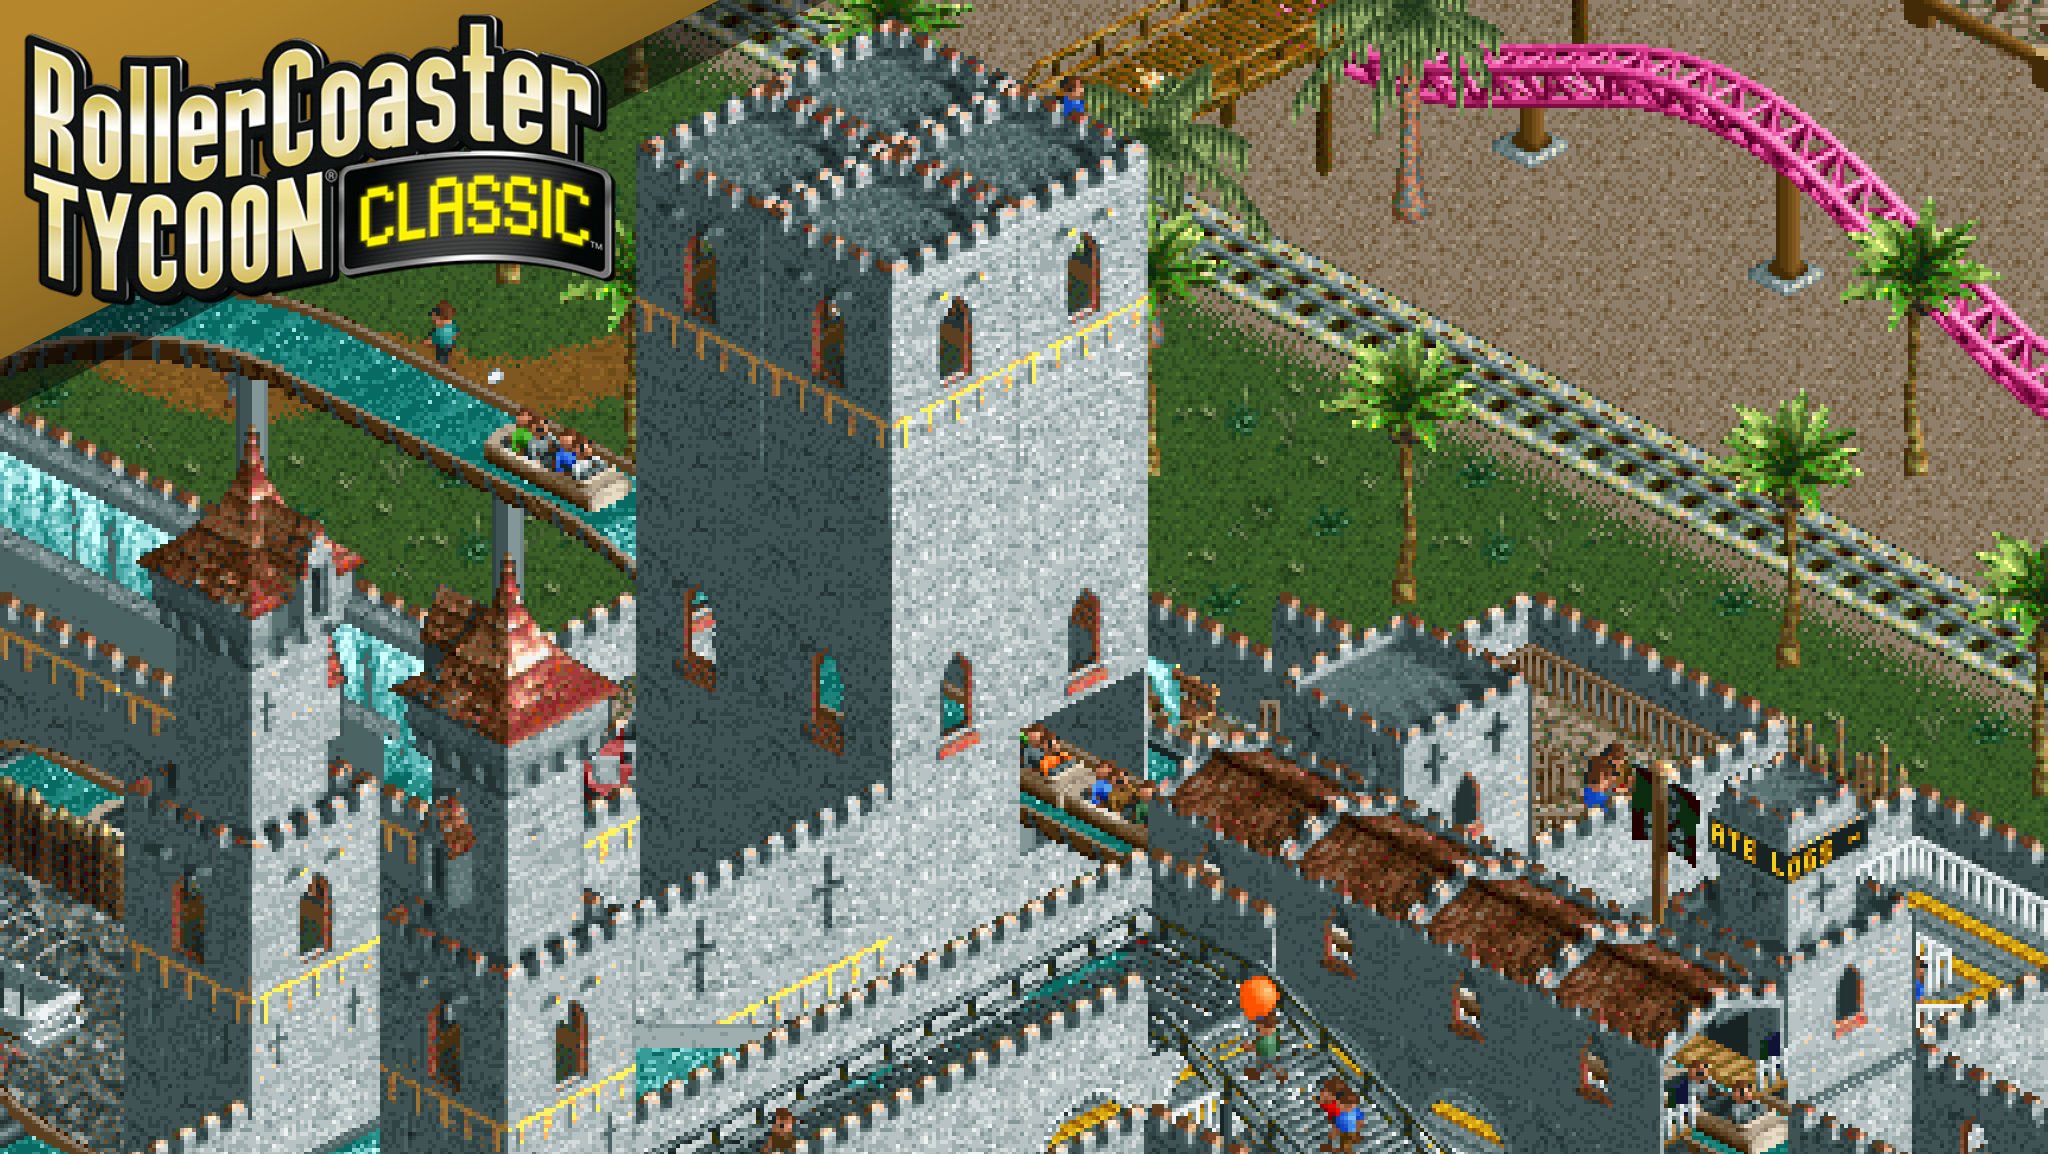 RollerCoaster Tycoon Classic Review: That’s More Like It